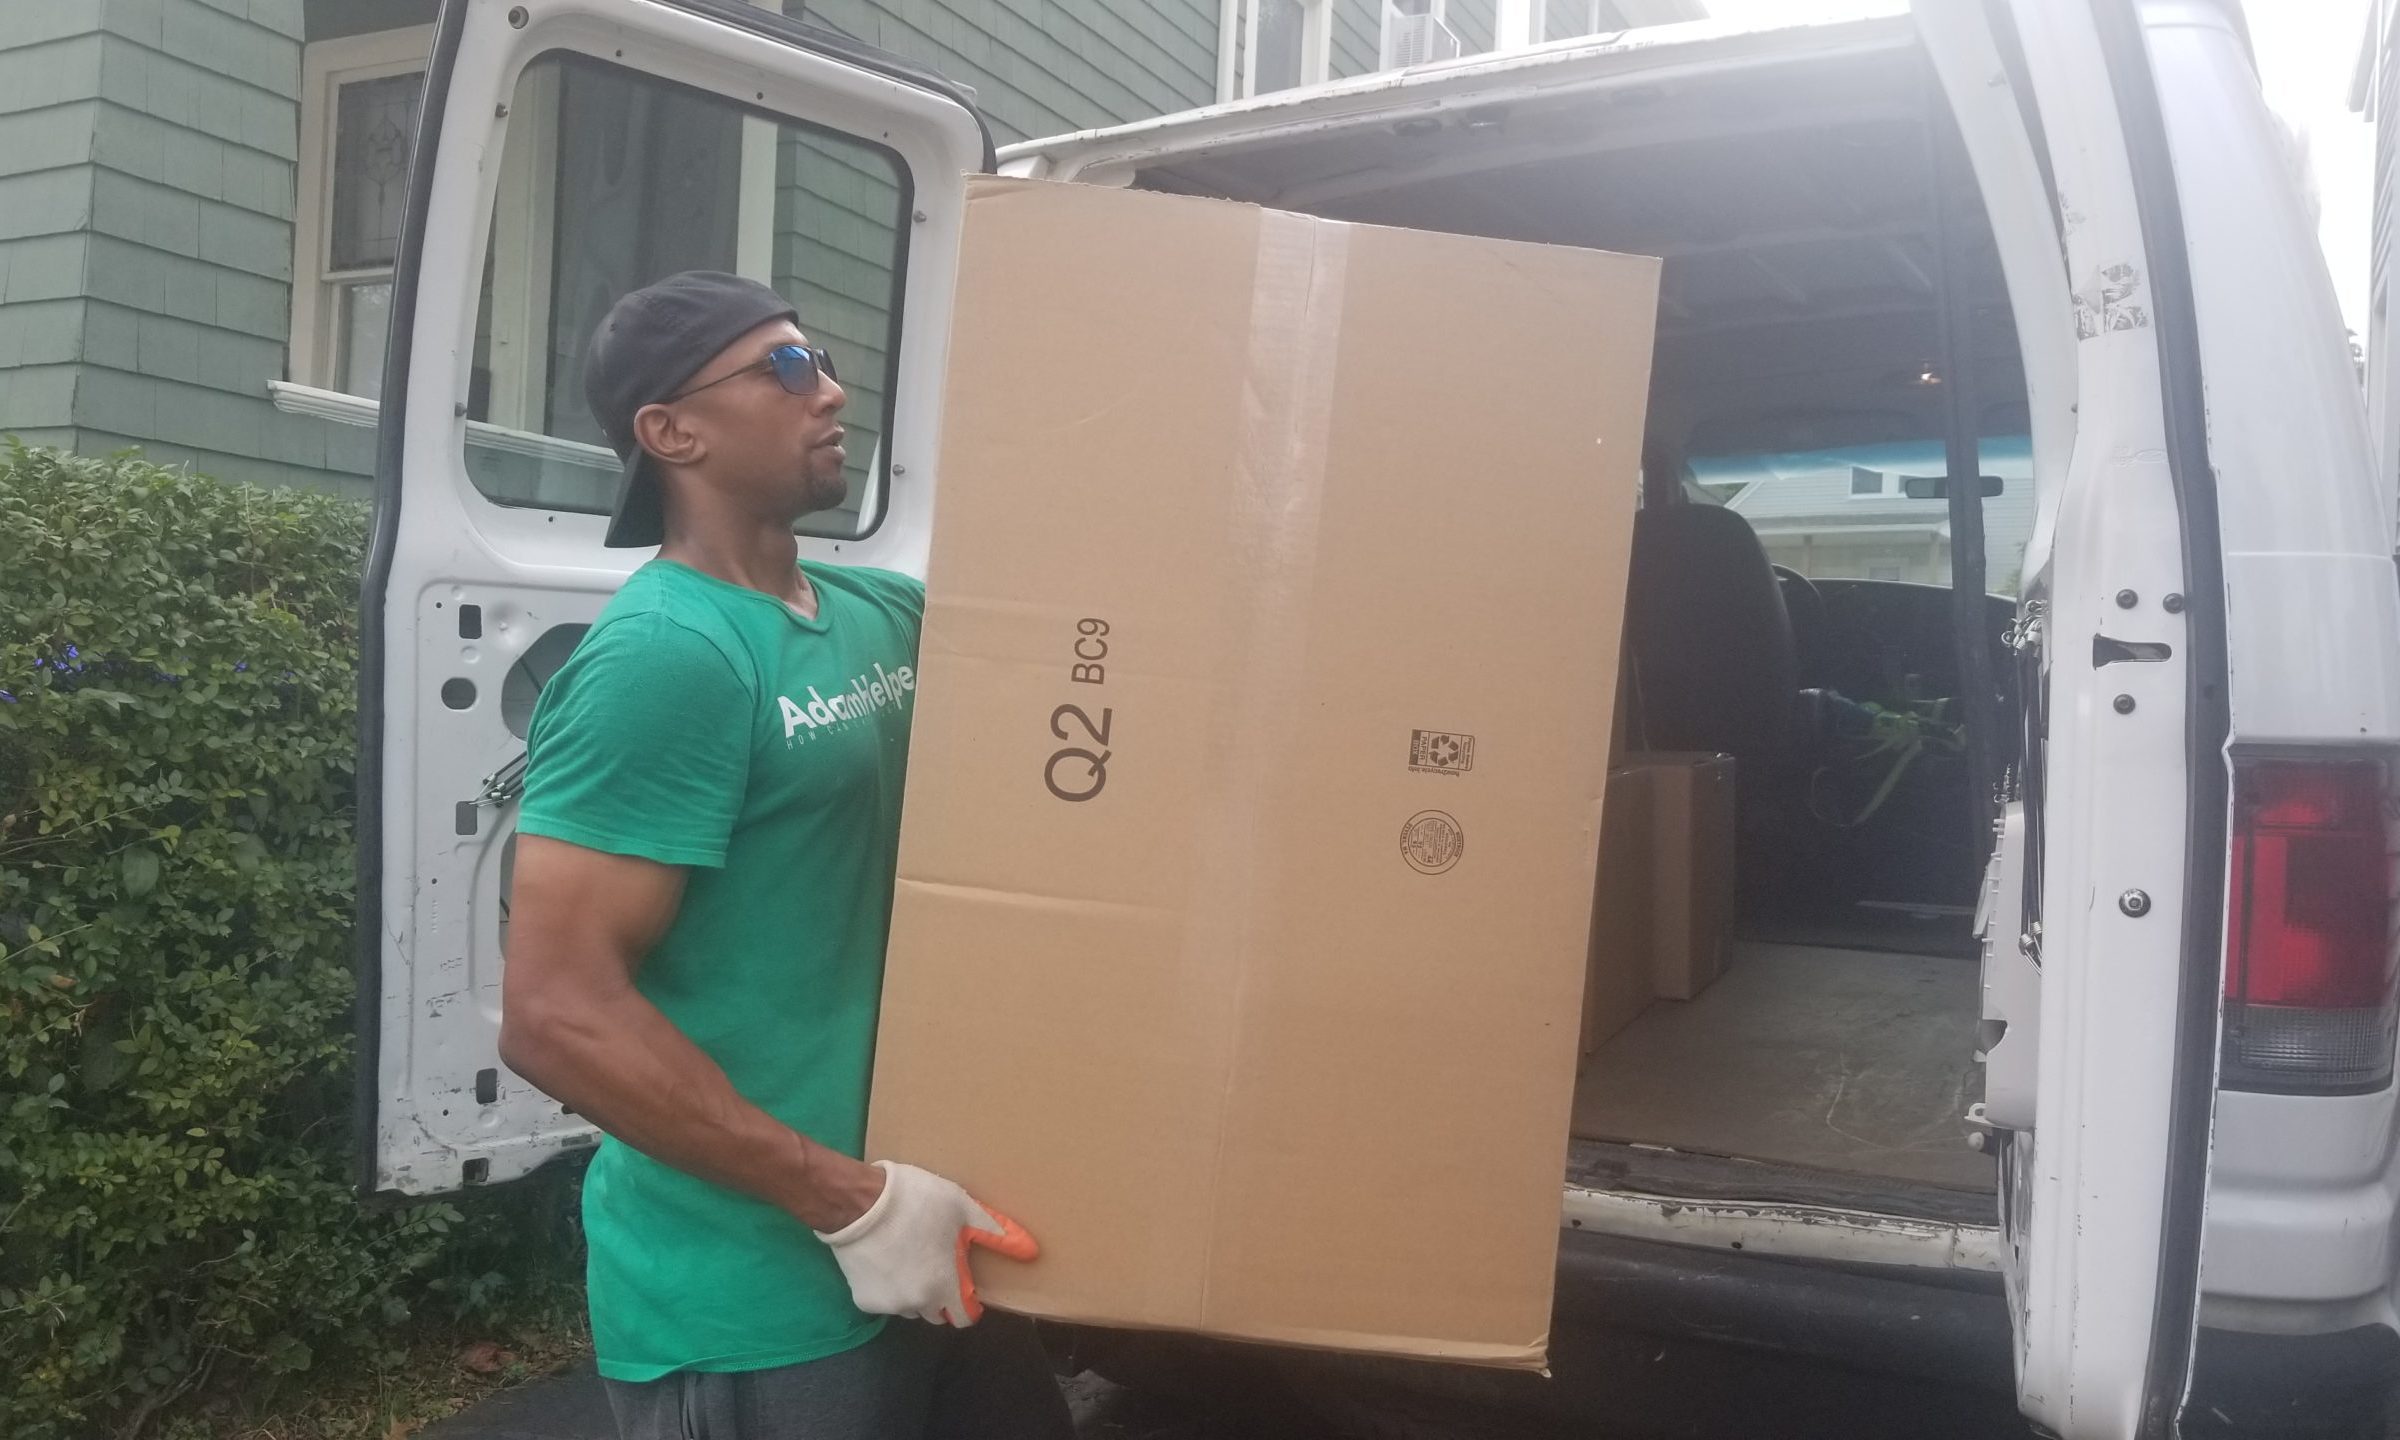 adamhelper boston mover among the best moving companies in massachusetts alongside gentle giant moving company small hauls boston and two guys and a truck